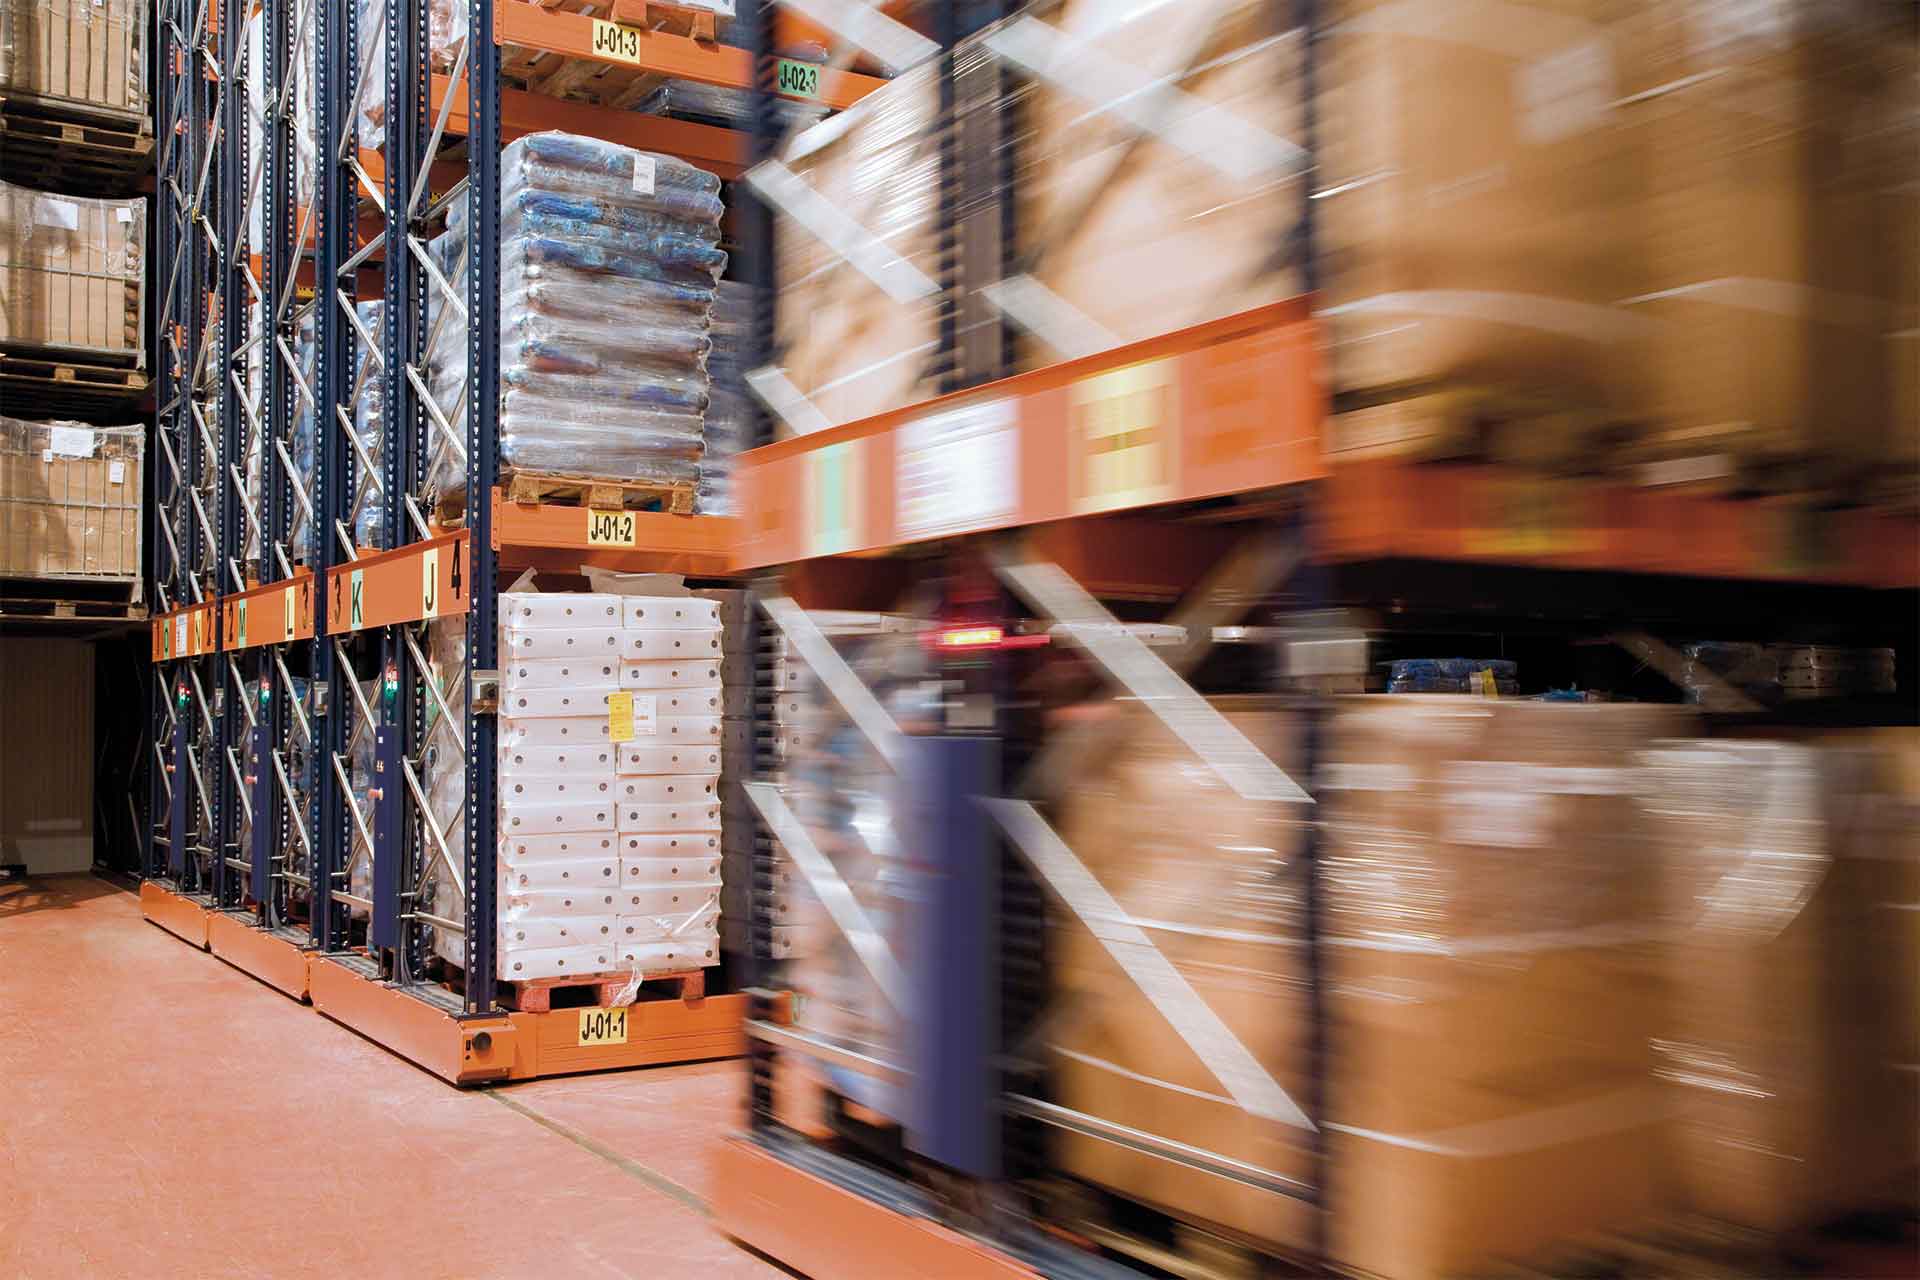 Mobile Racking Systems: Take advantage of every inch of space